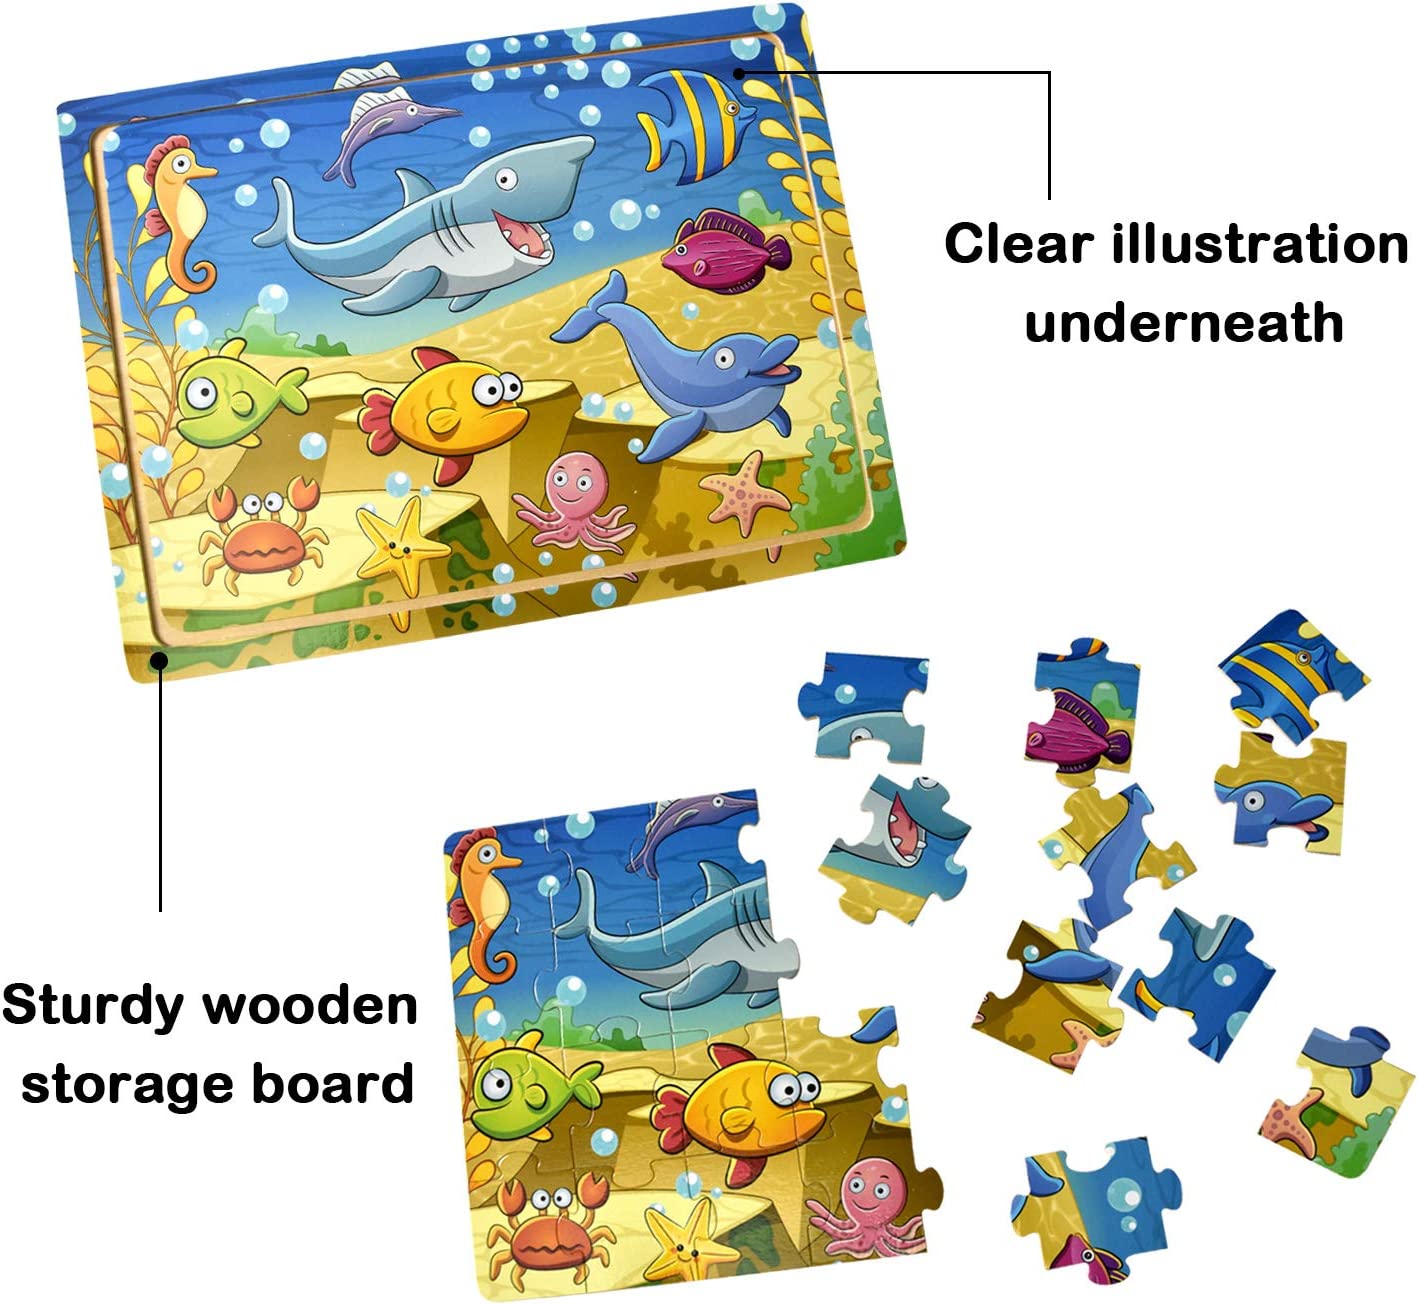 Wooden Puzzles for Kids Ages 2-5 - 24 Piece Puzzle for Toddlers Preschool Kids Jigsaw Puzzles - 4 Pack Vibrant Children Theme Learning Educational Puzzle Set for Kids 2 3 4 5 Year Old - image 3 of 7